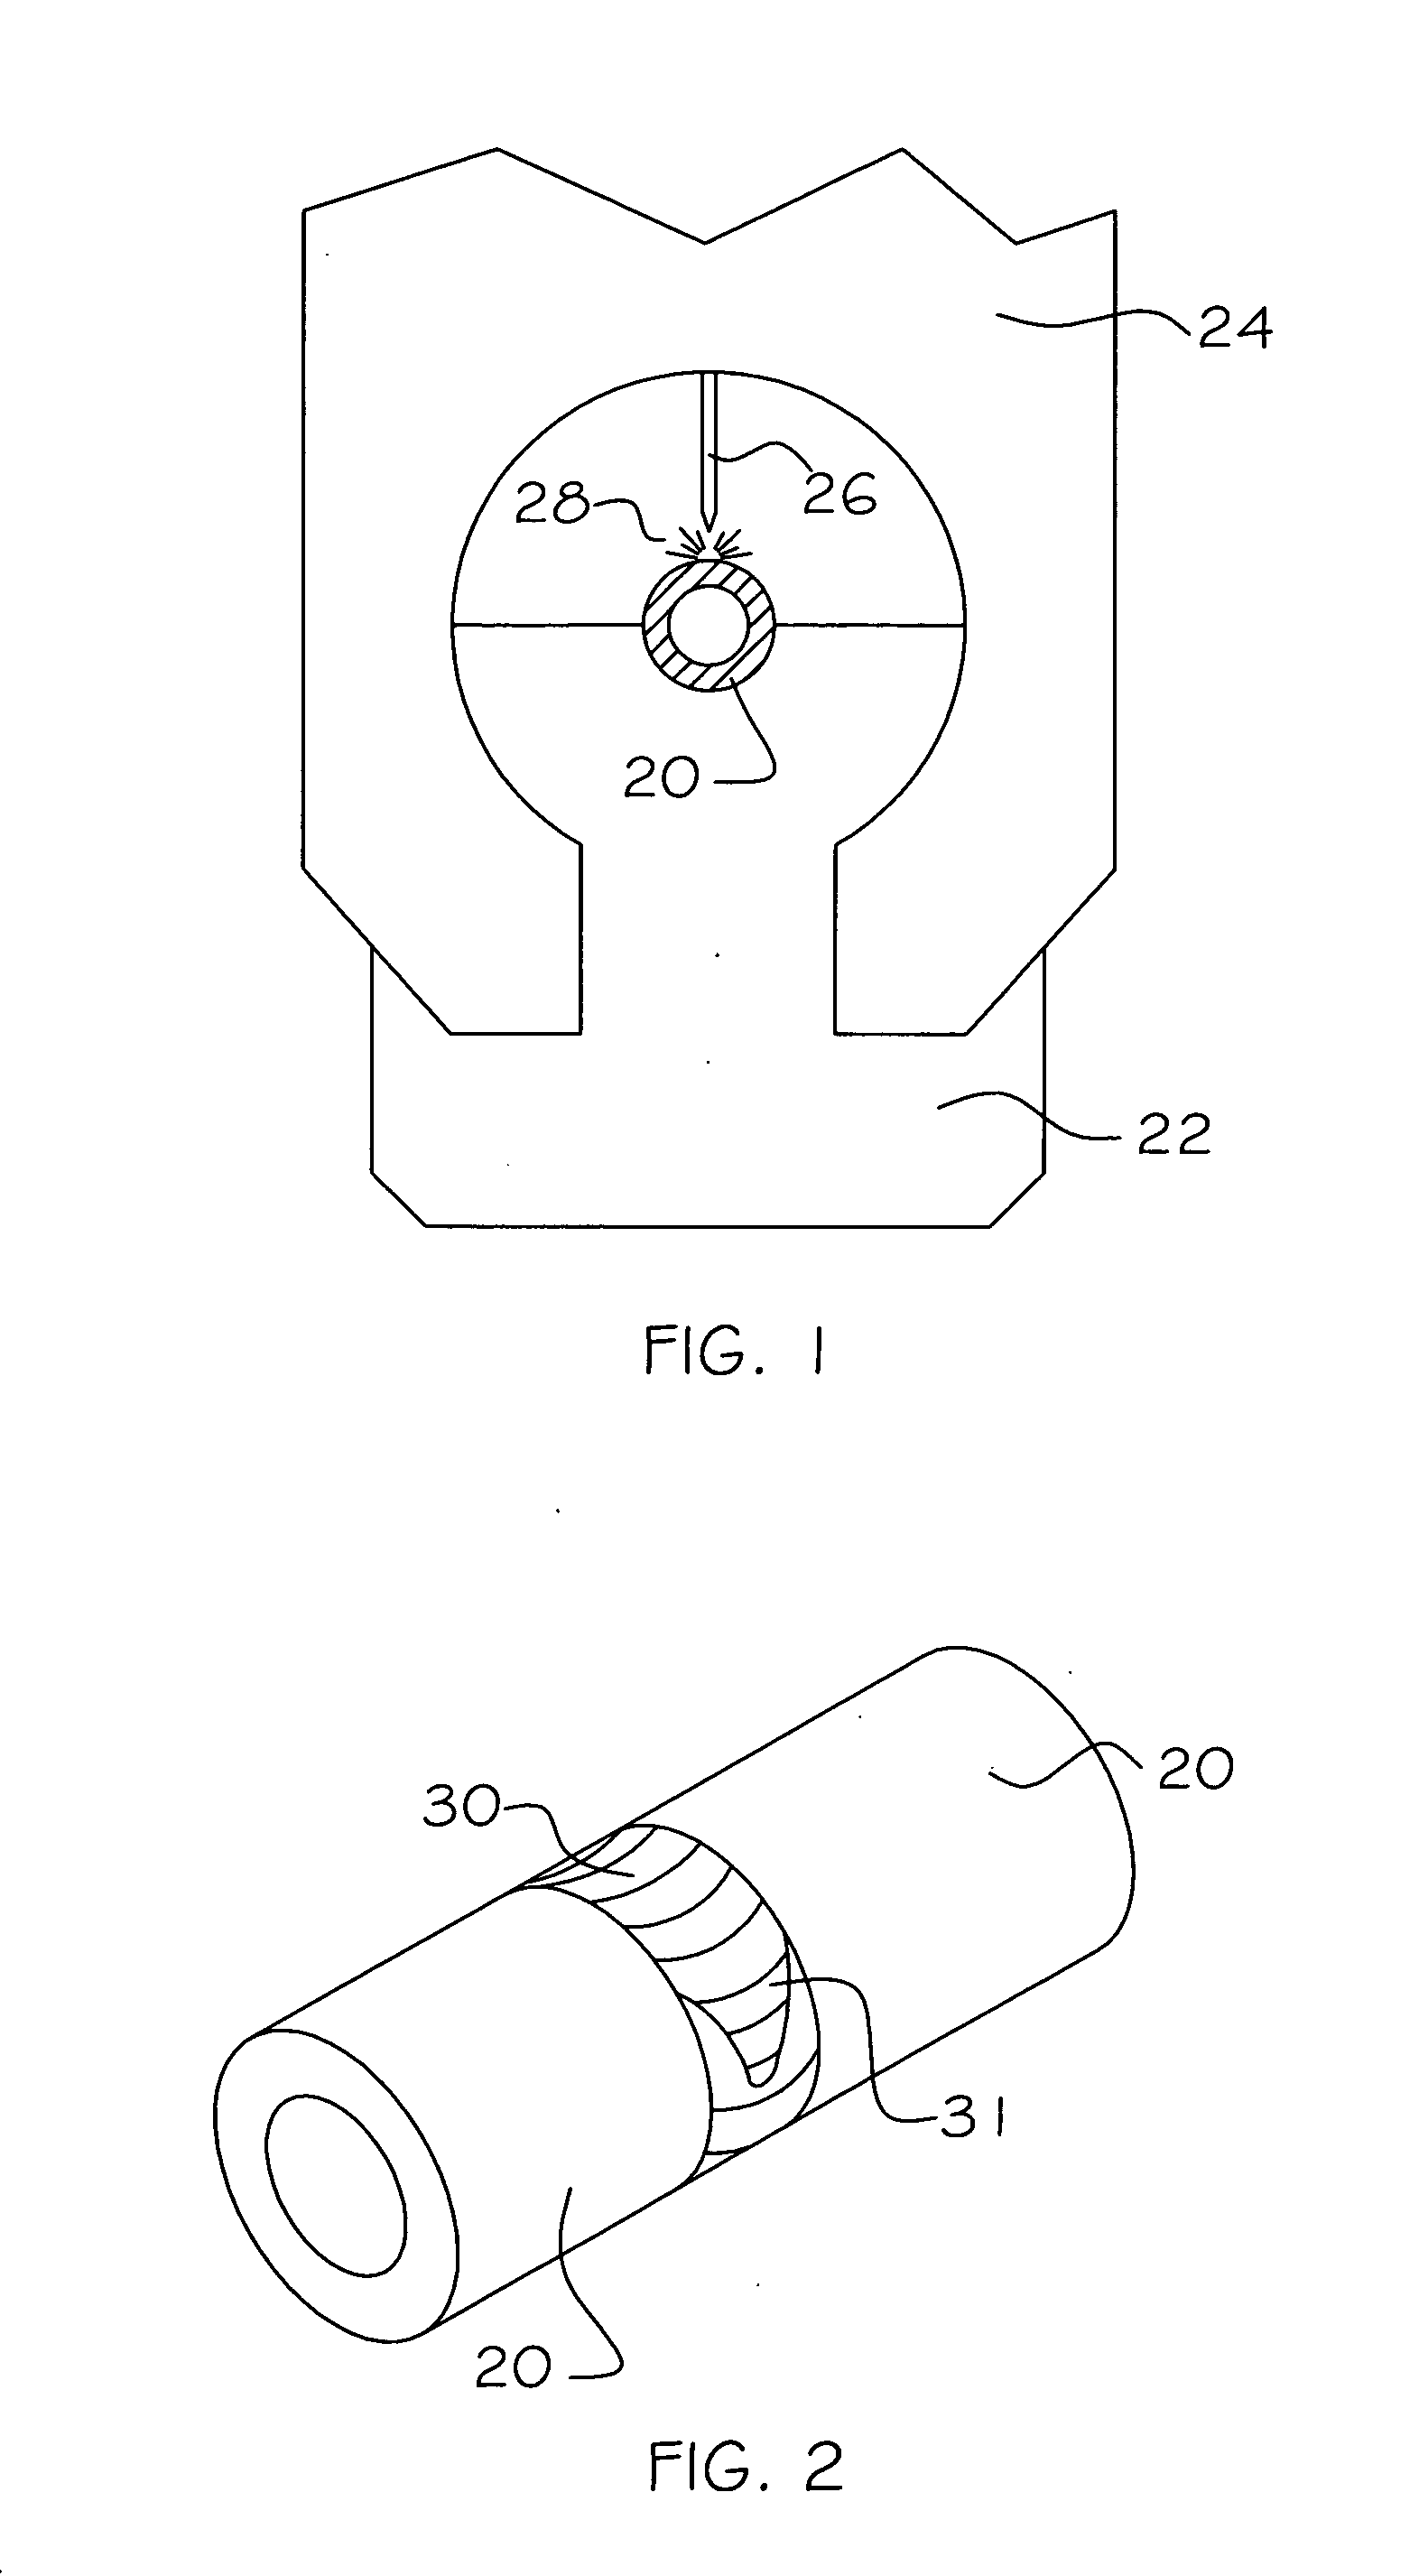 Method for orbital welding using a pulsed current